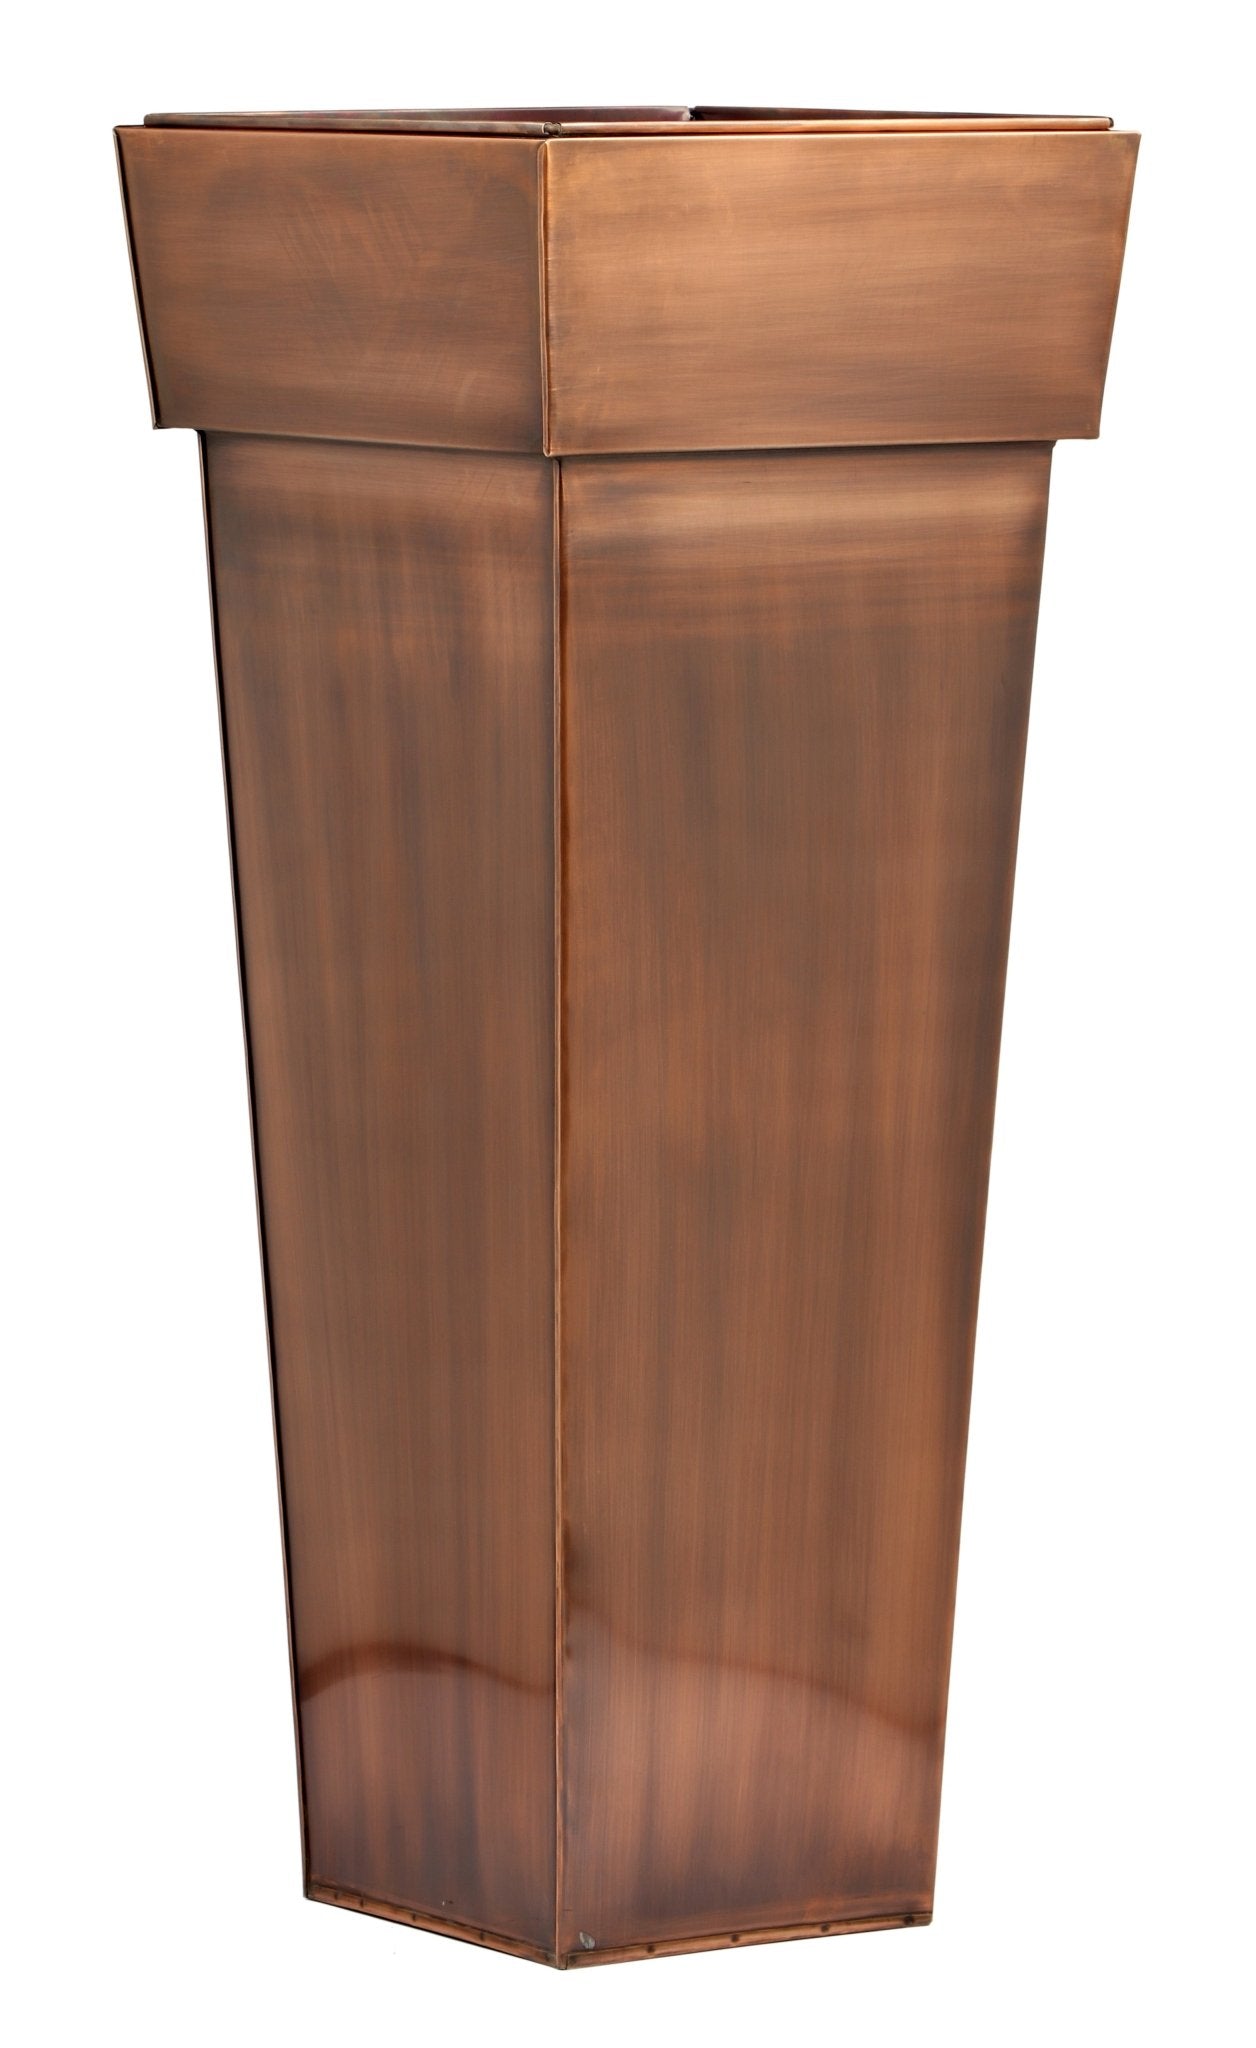 H Potter Tall Square Planter Stainless Steel w/Antique Copper Finish 36.5" Height